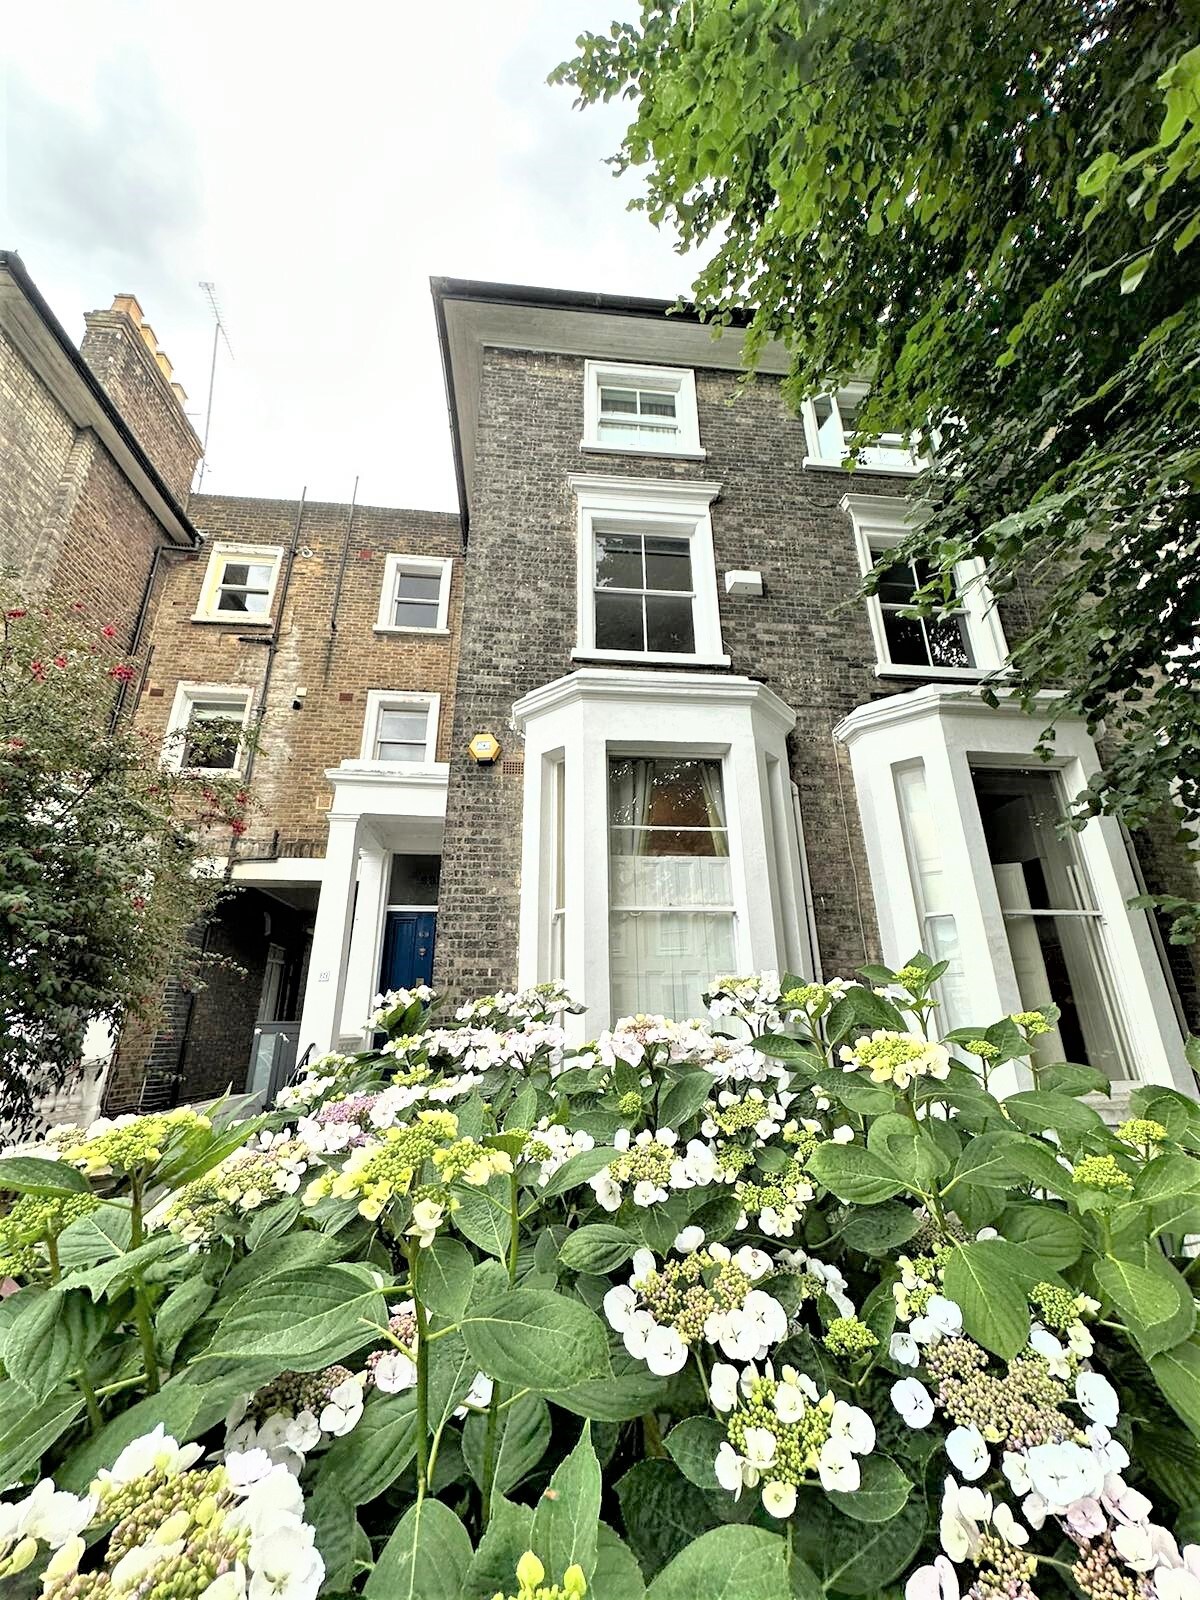 Stunning 2-Bed Flat in Maida Vale near Abbey Road